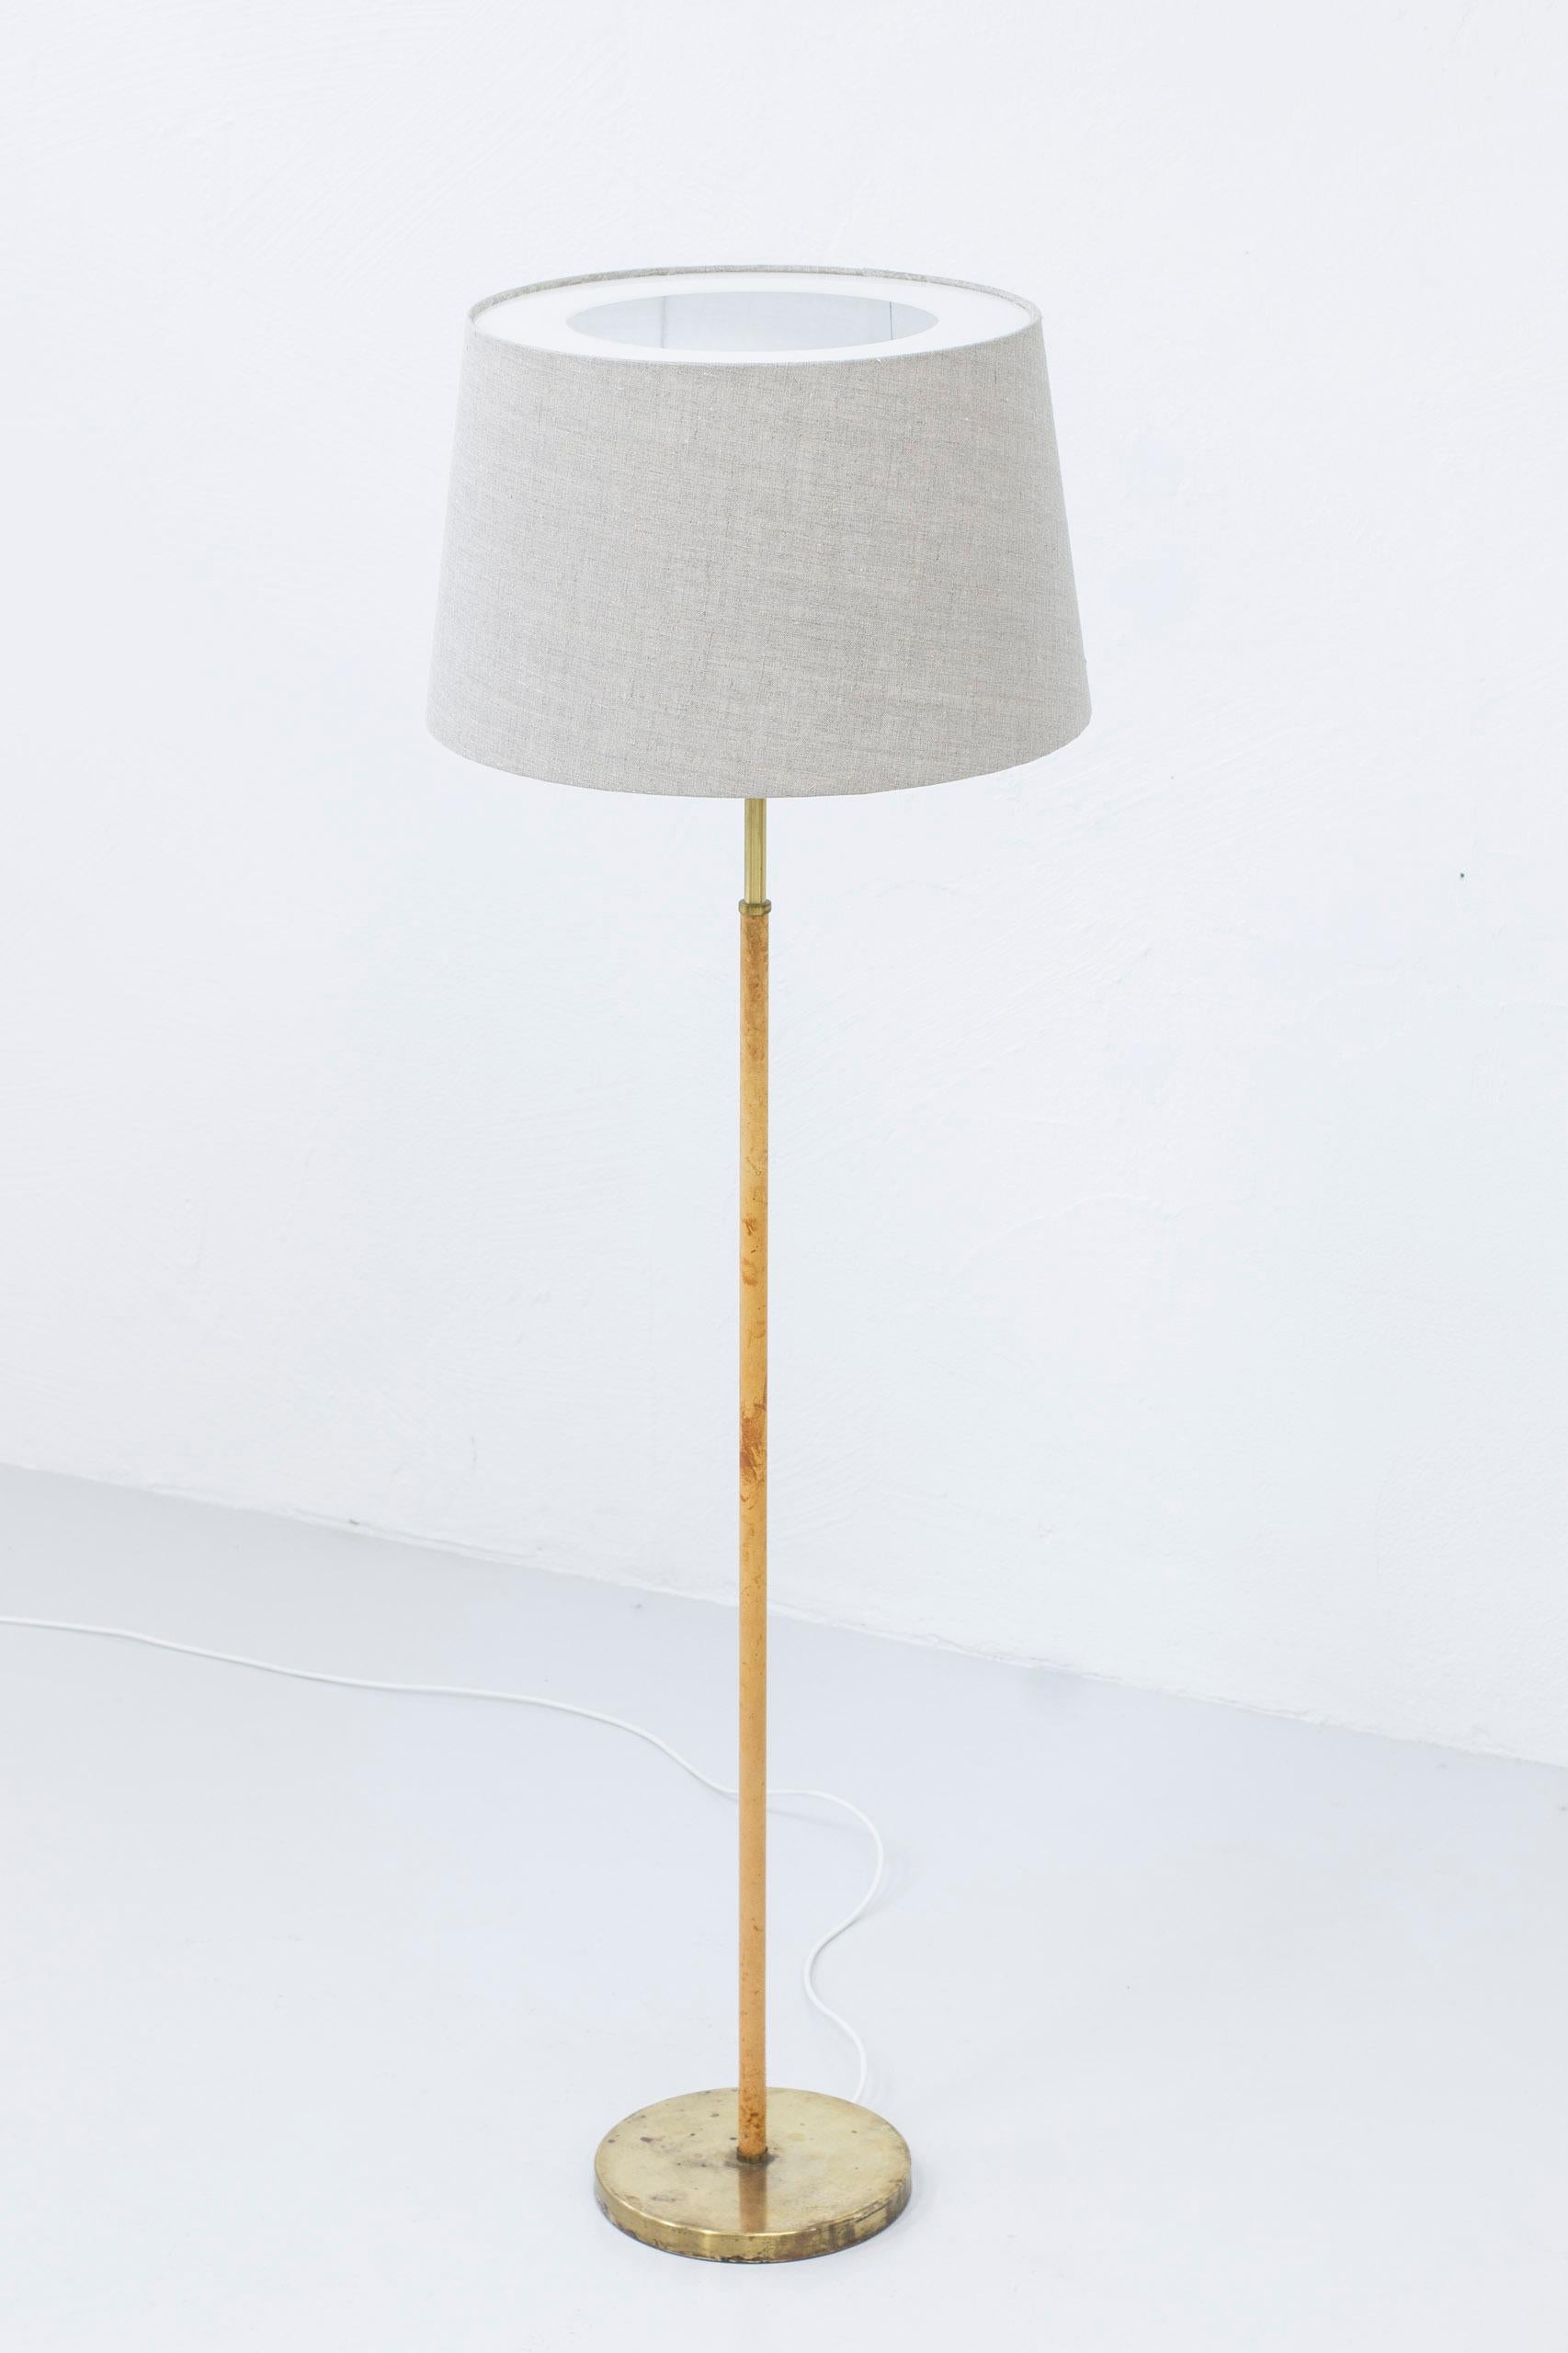 Scandinavian Modern Floor Lamp with Original Leather and Brass by Anders Pehrson, Ateljé Lyktan For Sale